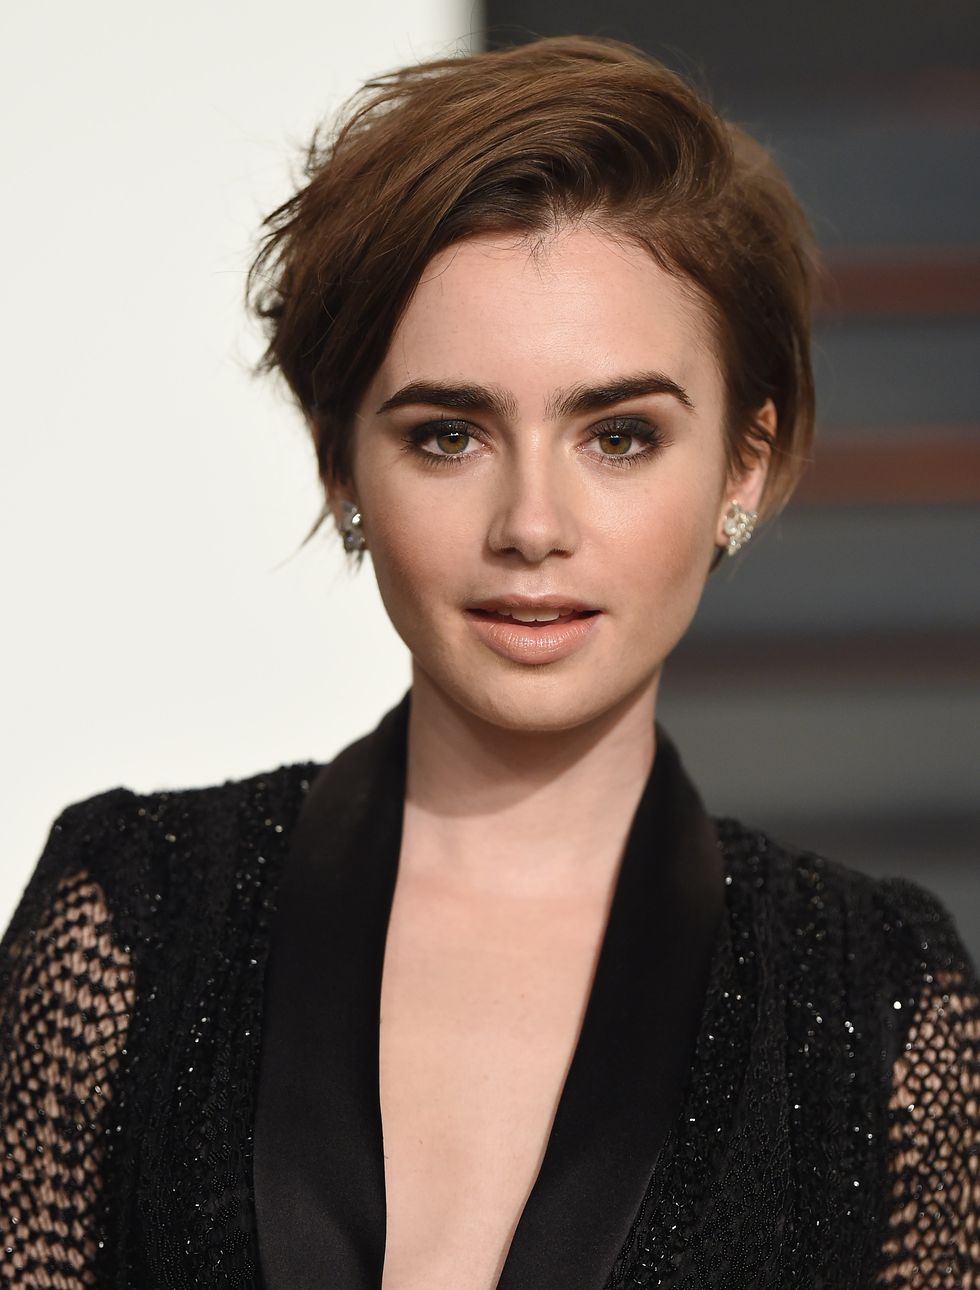 beverly hills, ca february 22 actress lily collins arrives at the 2015 vanity fair oscar party hosted by graydon carter at wallis annenberg center for the performing arts on february 22, 2015 in beverly hills, california photo by axellebauer griffinfilmmagic